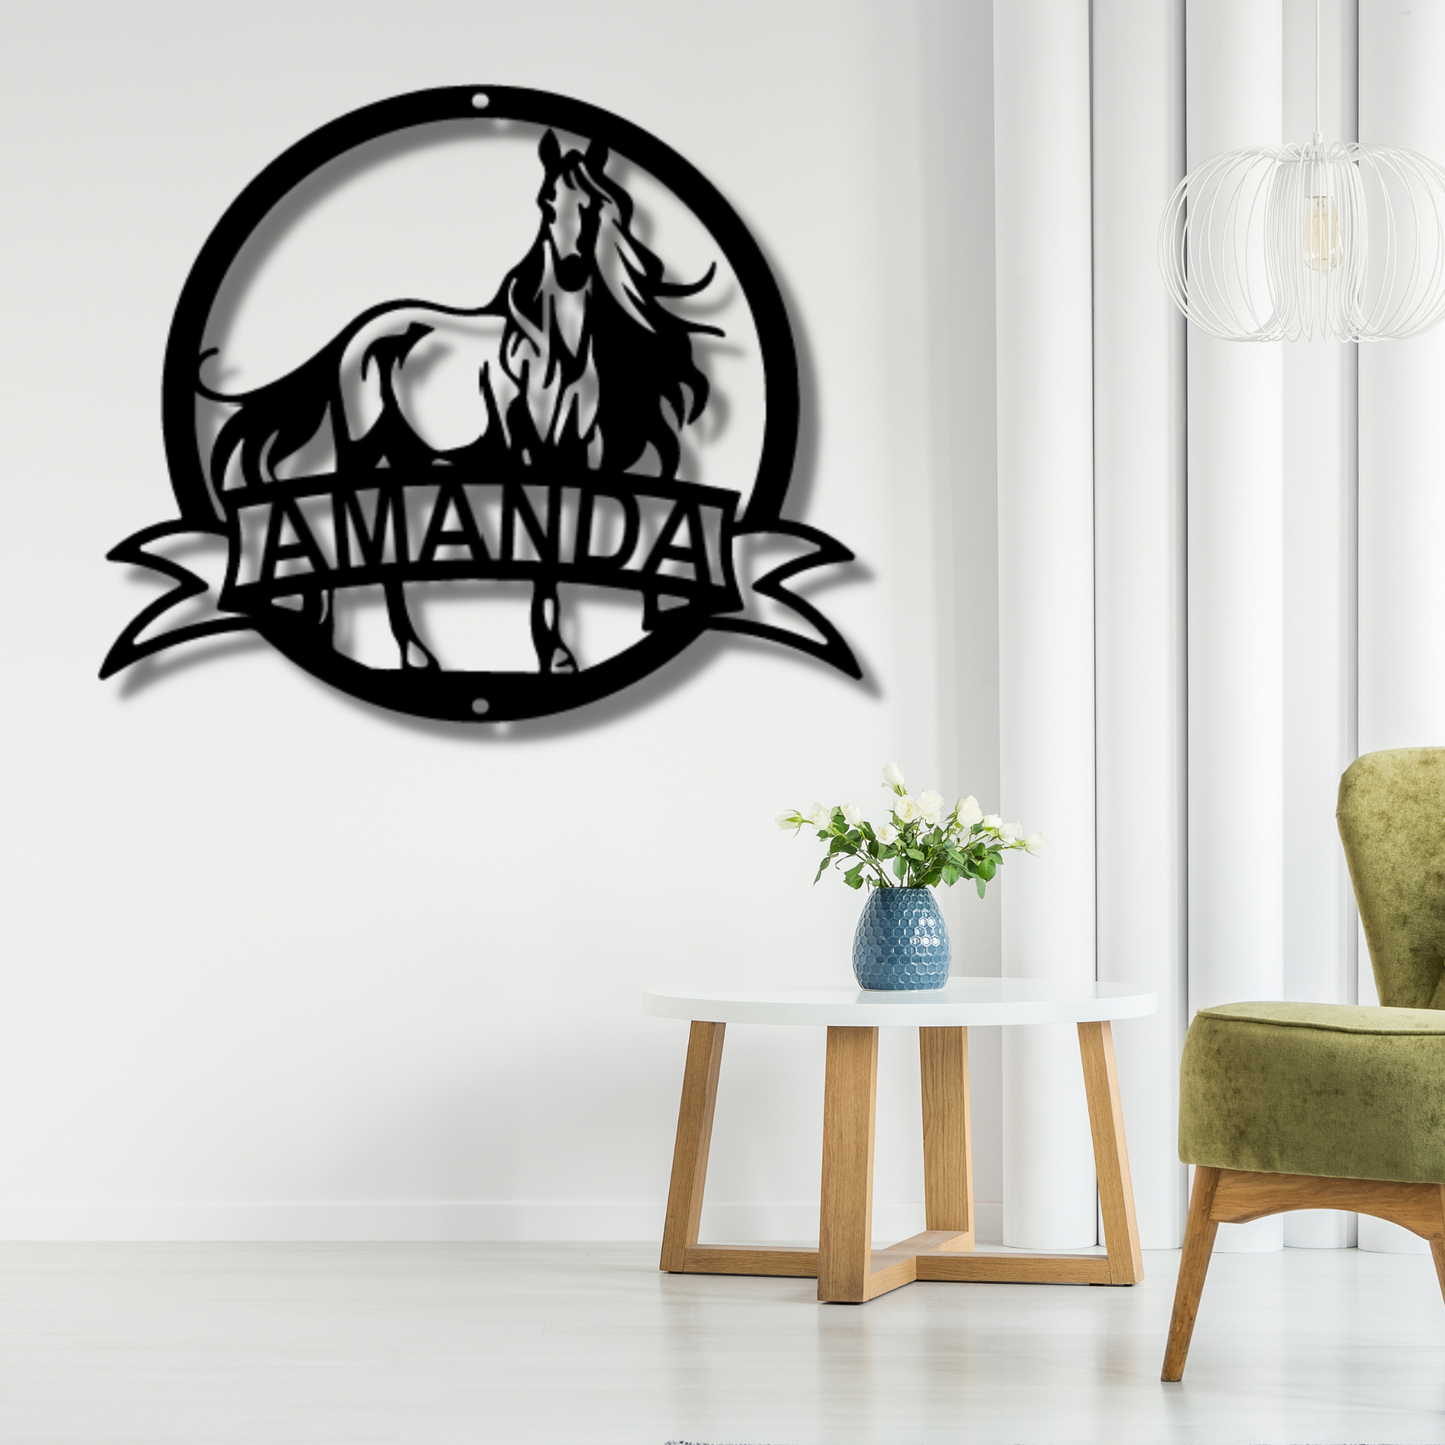 Majestic Horse Monogram - Steel Sign, Wall Signs For Living Room, Door Hanger, Monogram Wall Art, Personalized Metal Wall Decor, House Decor